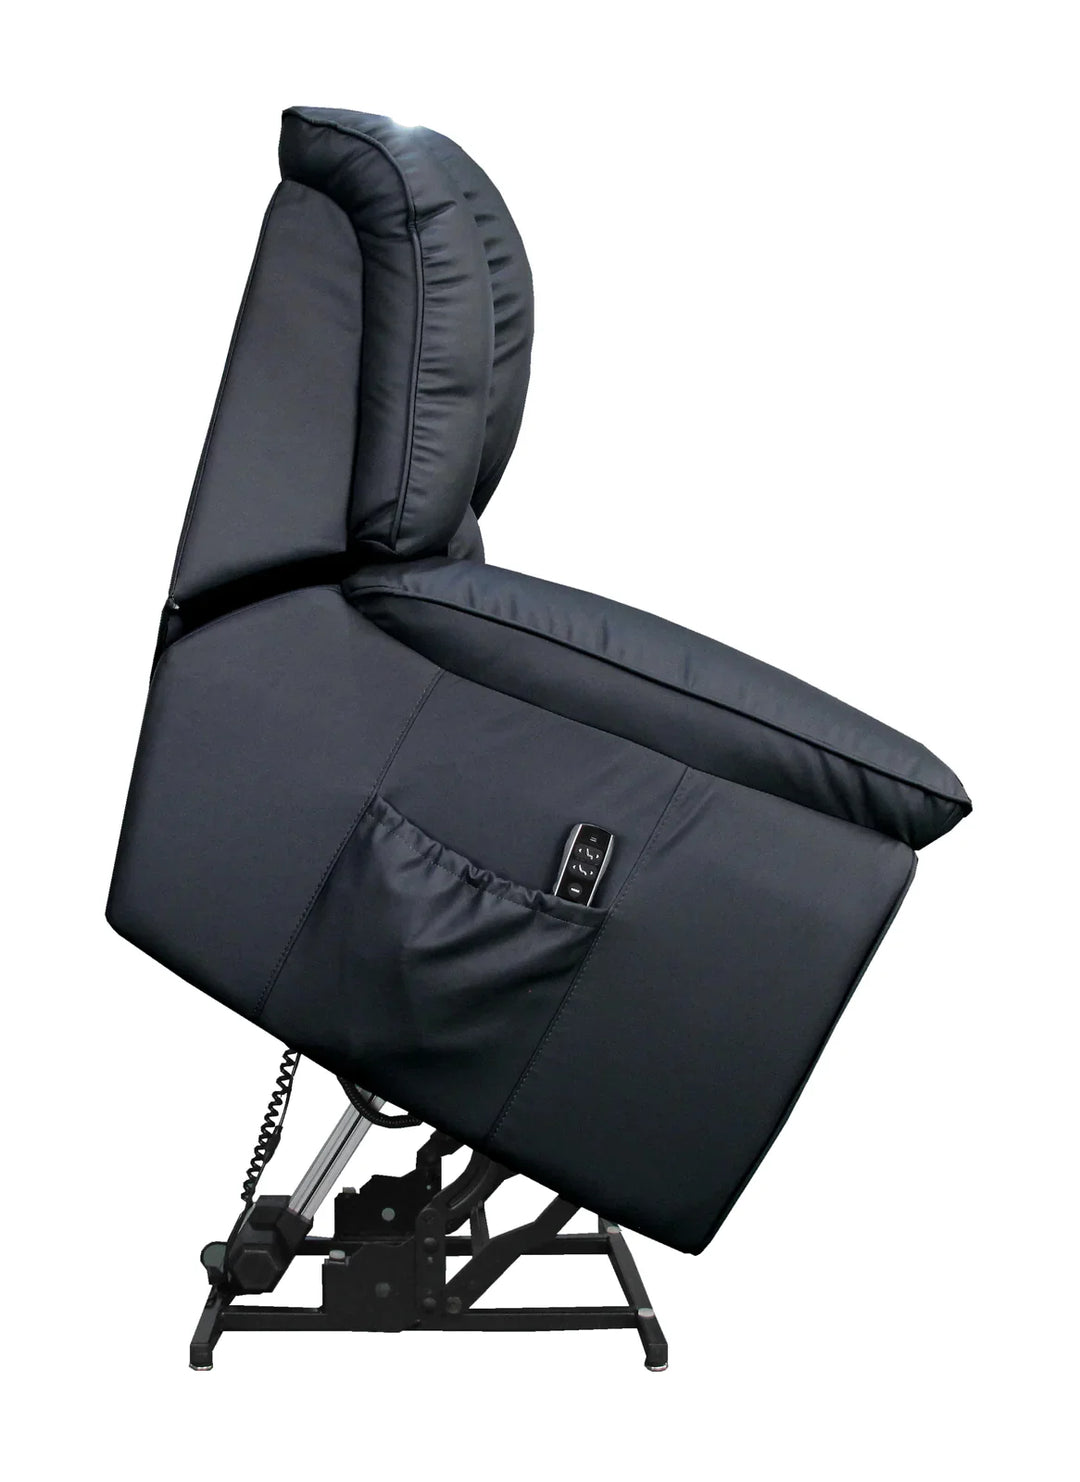 What Is a Lift Chair? An Essential Guide for Comfort and Mobility